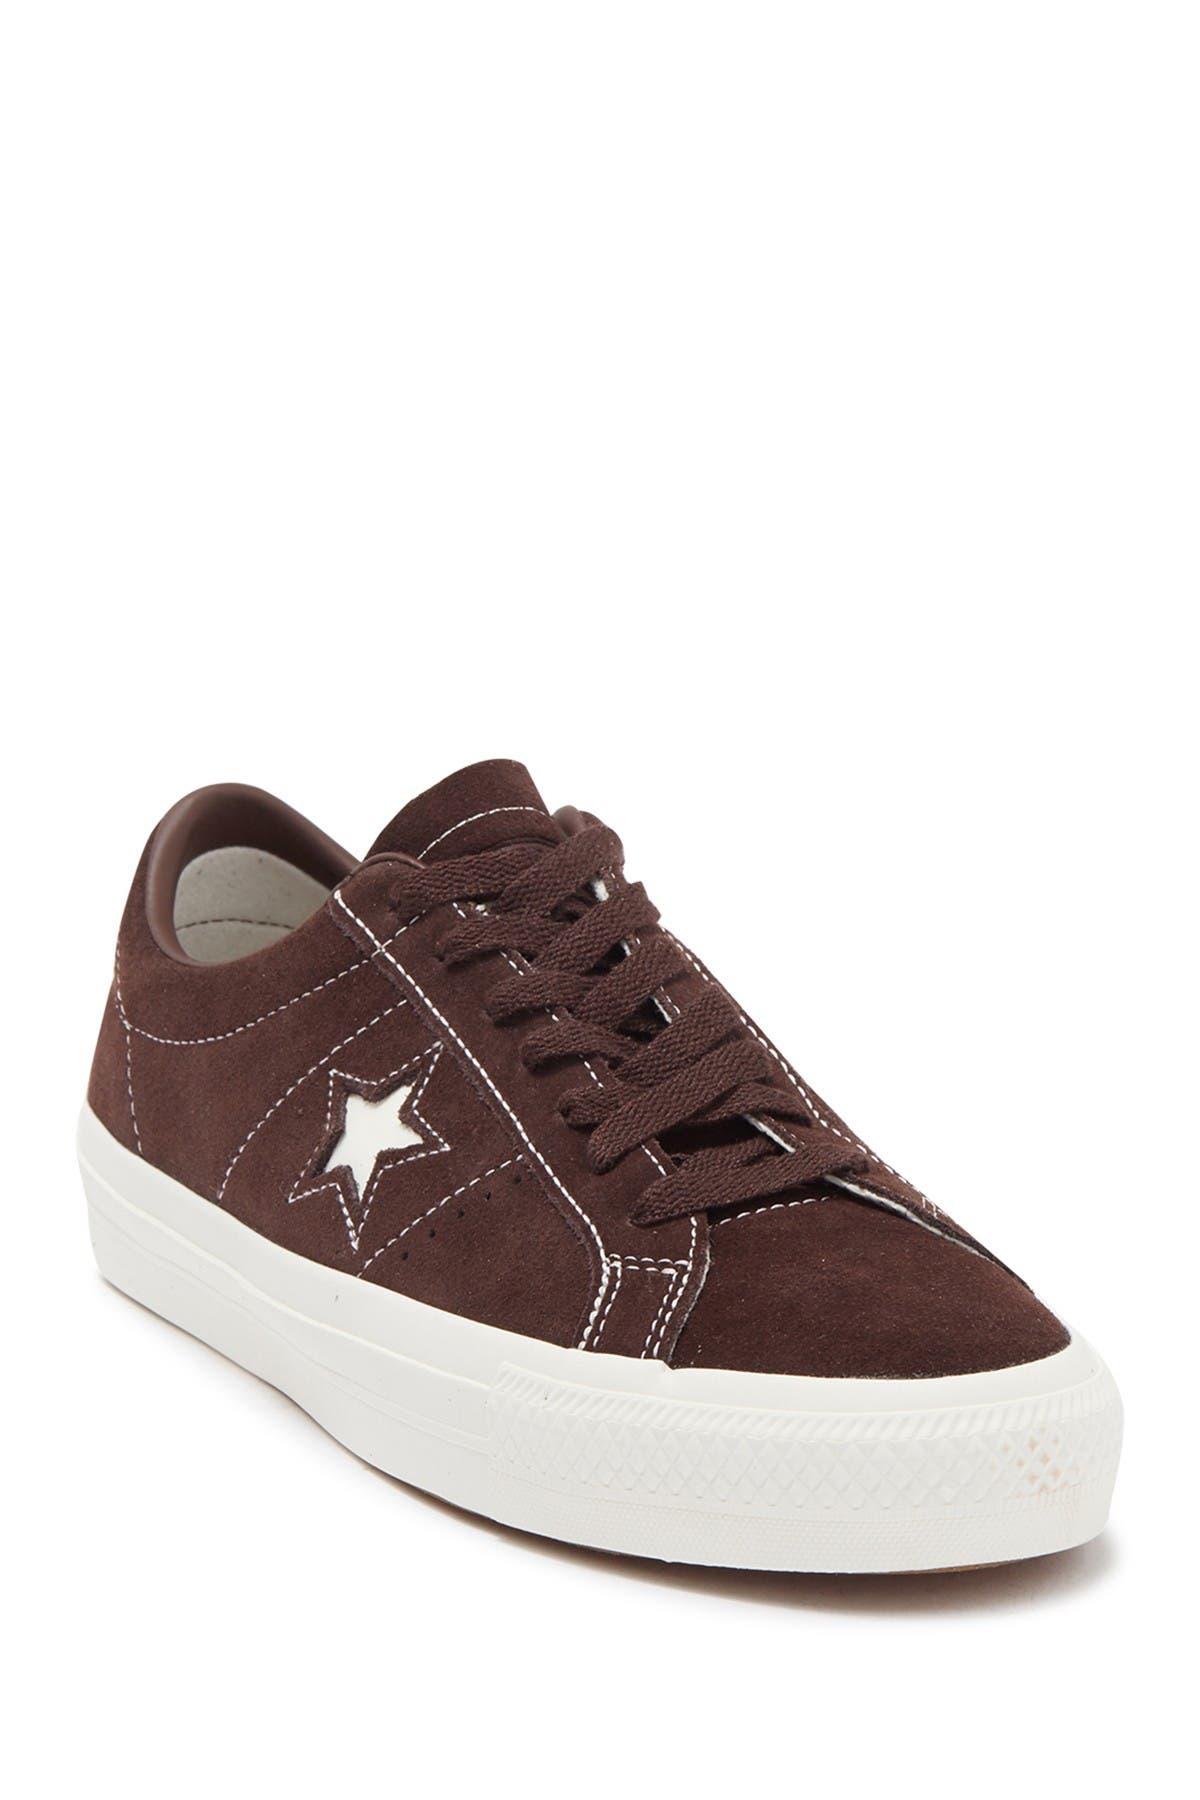 Converse One Star Low in Brown for Men